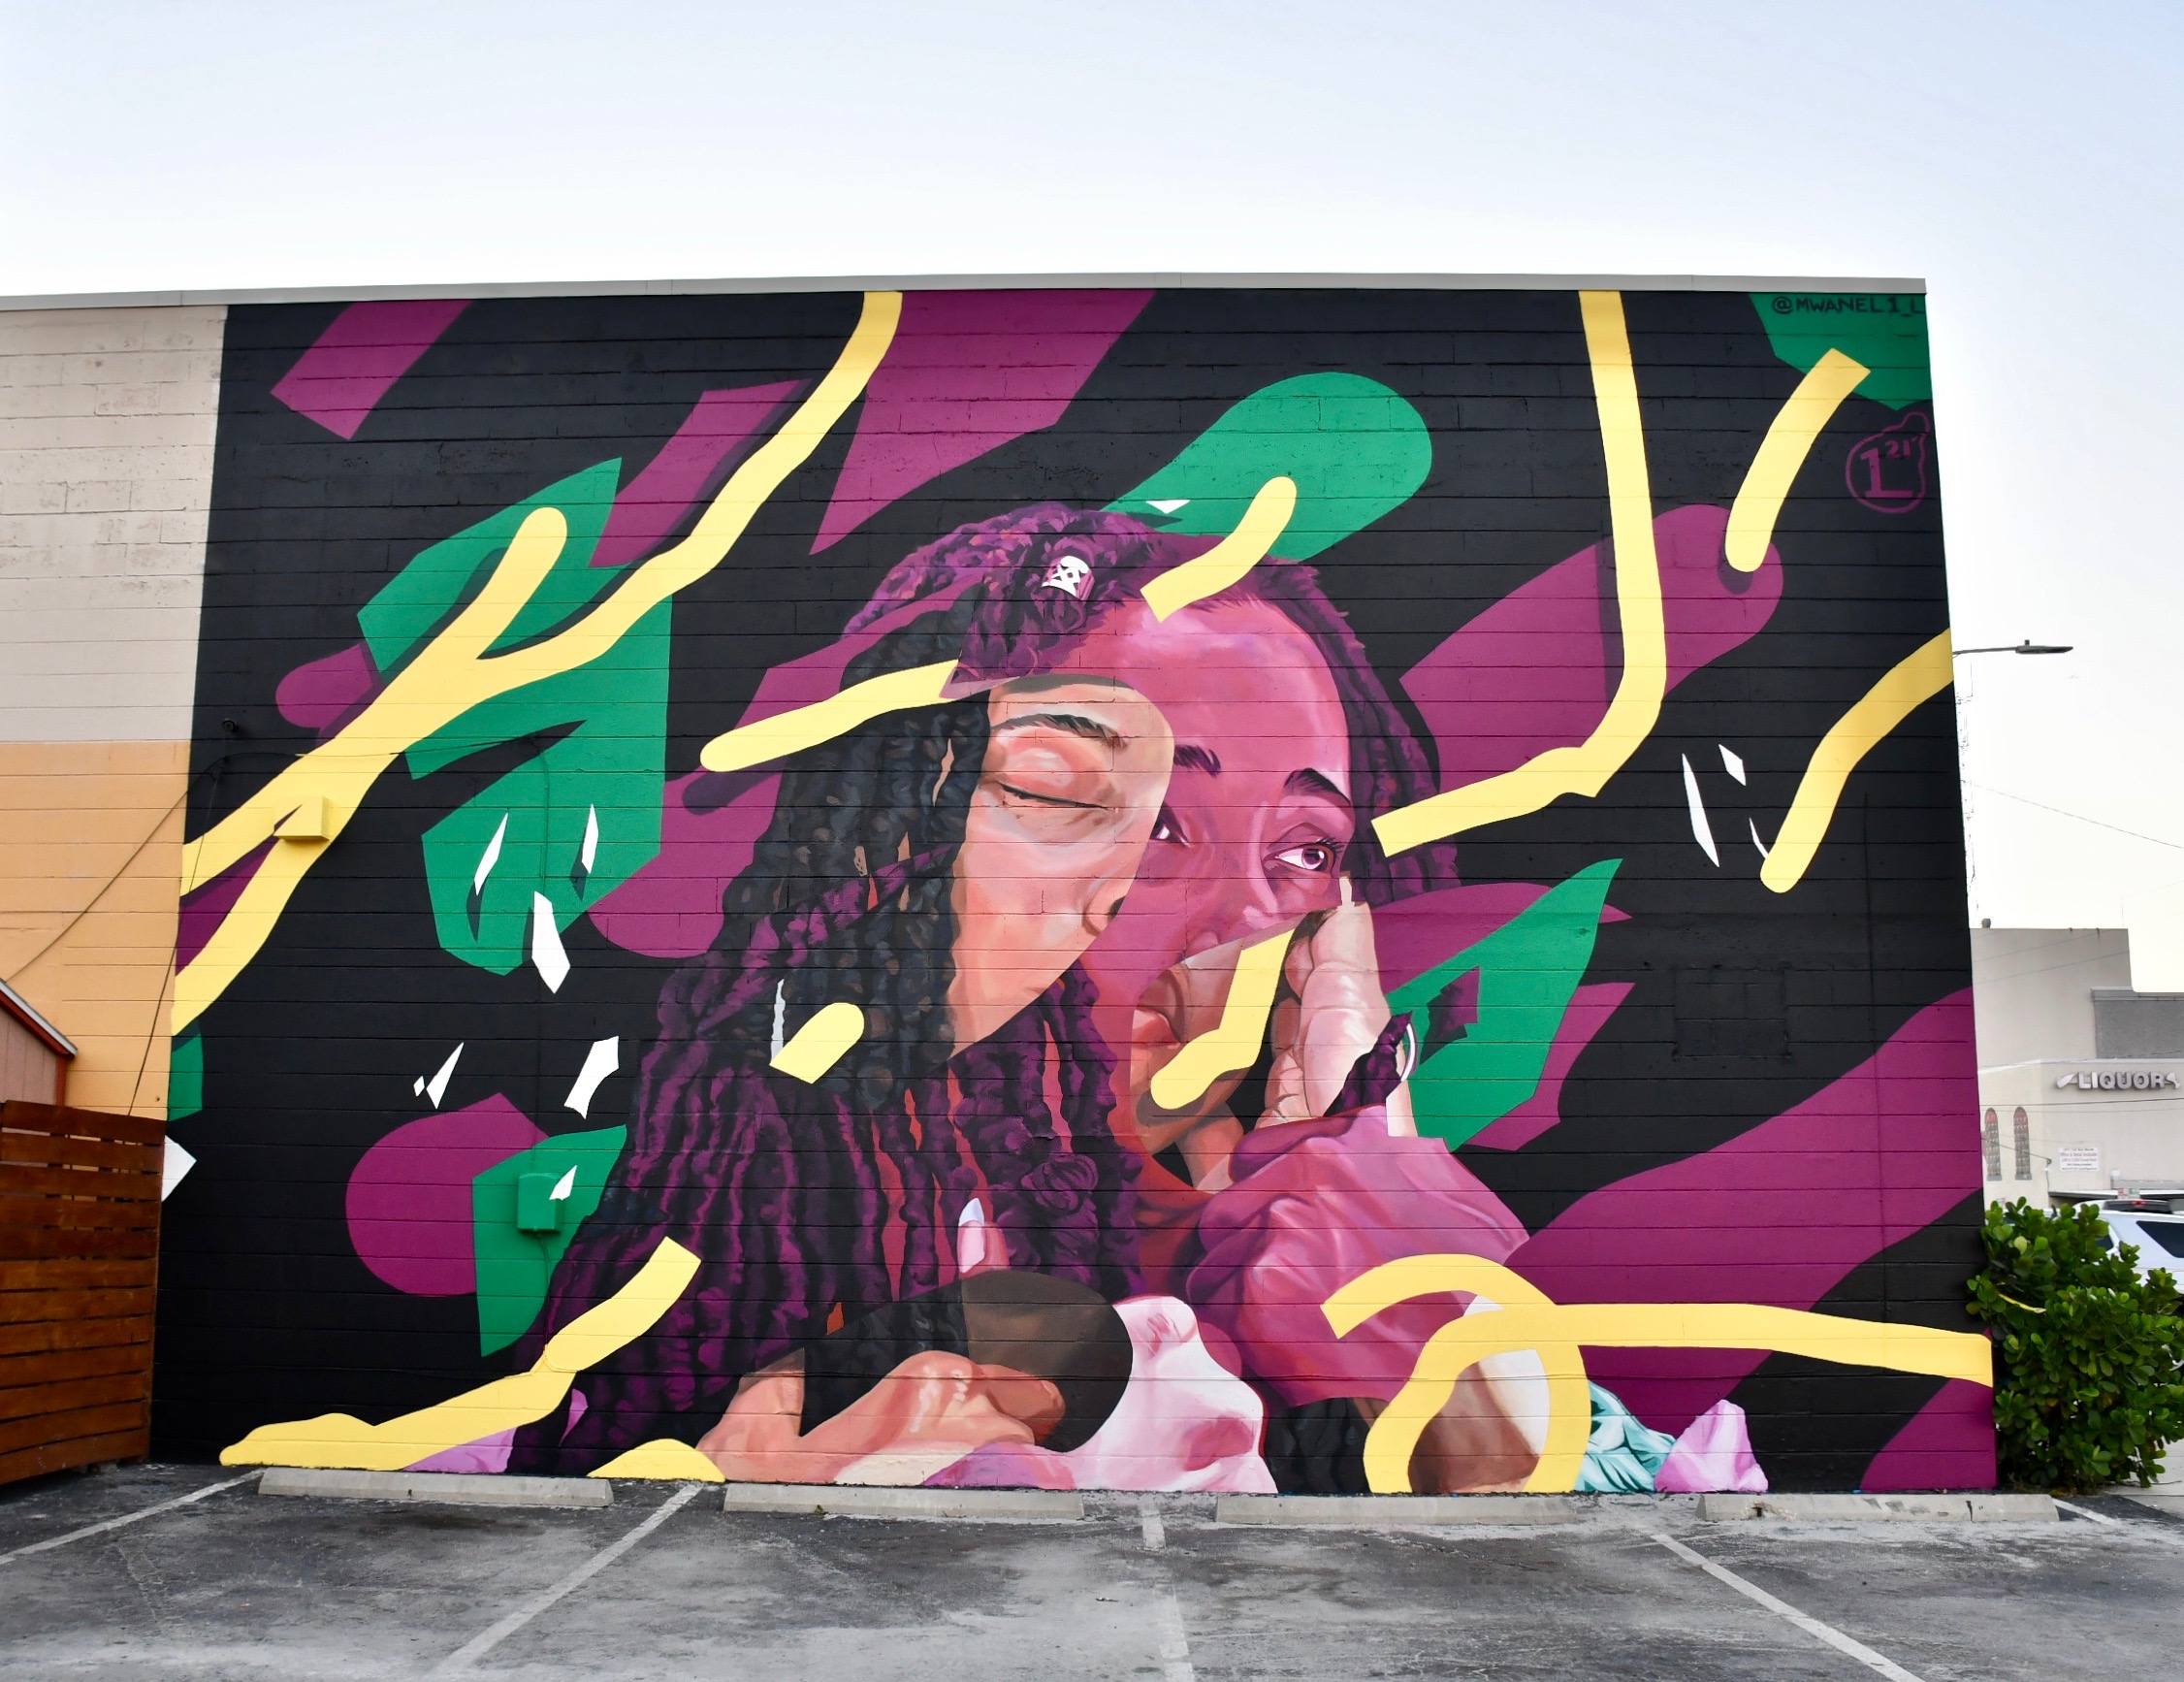 Guide to Shine Mural Festival in St. Petersburg: Here's what you